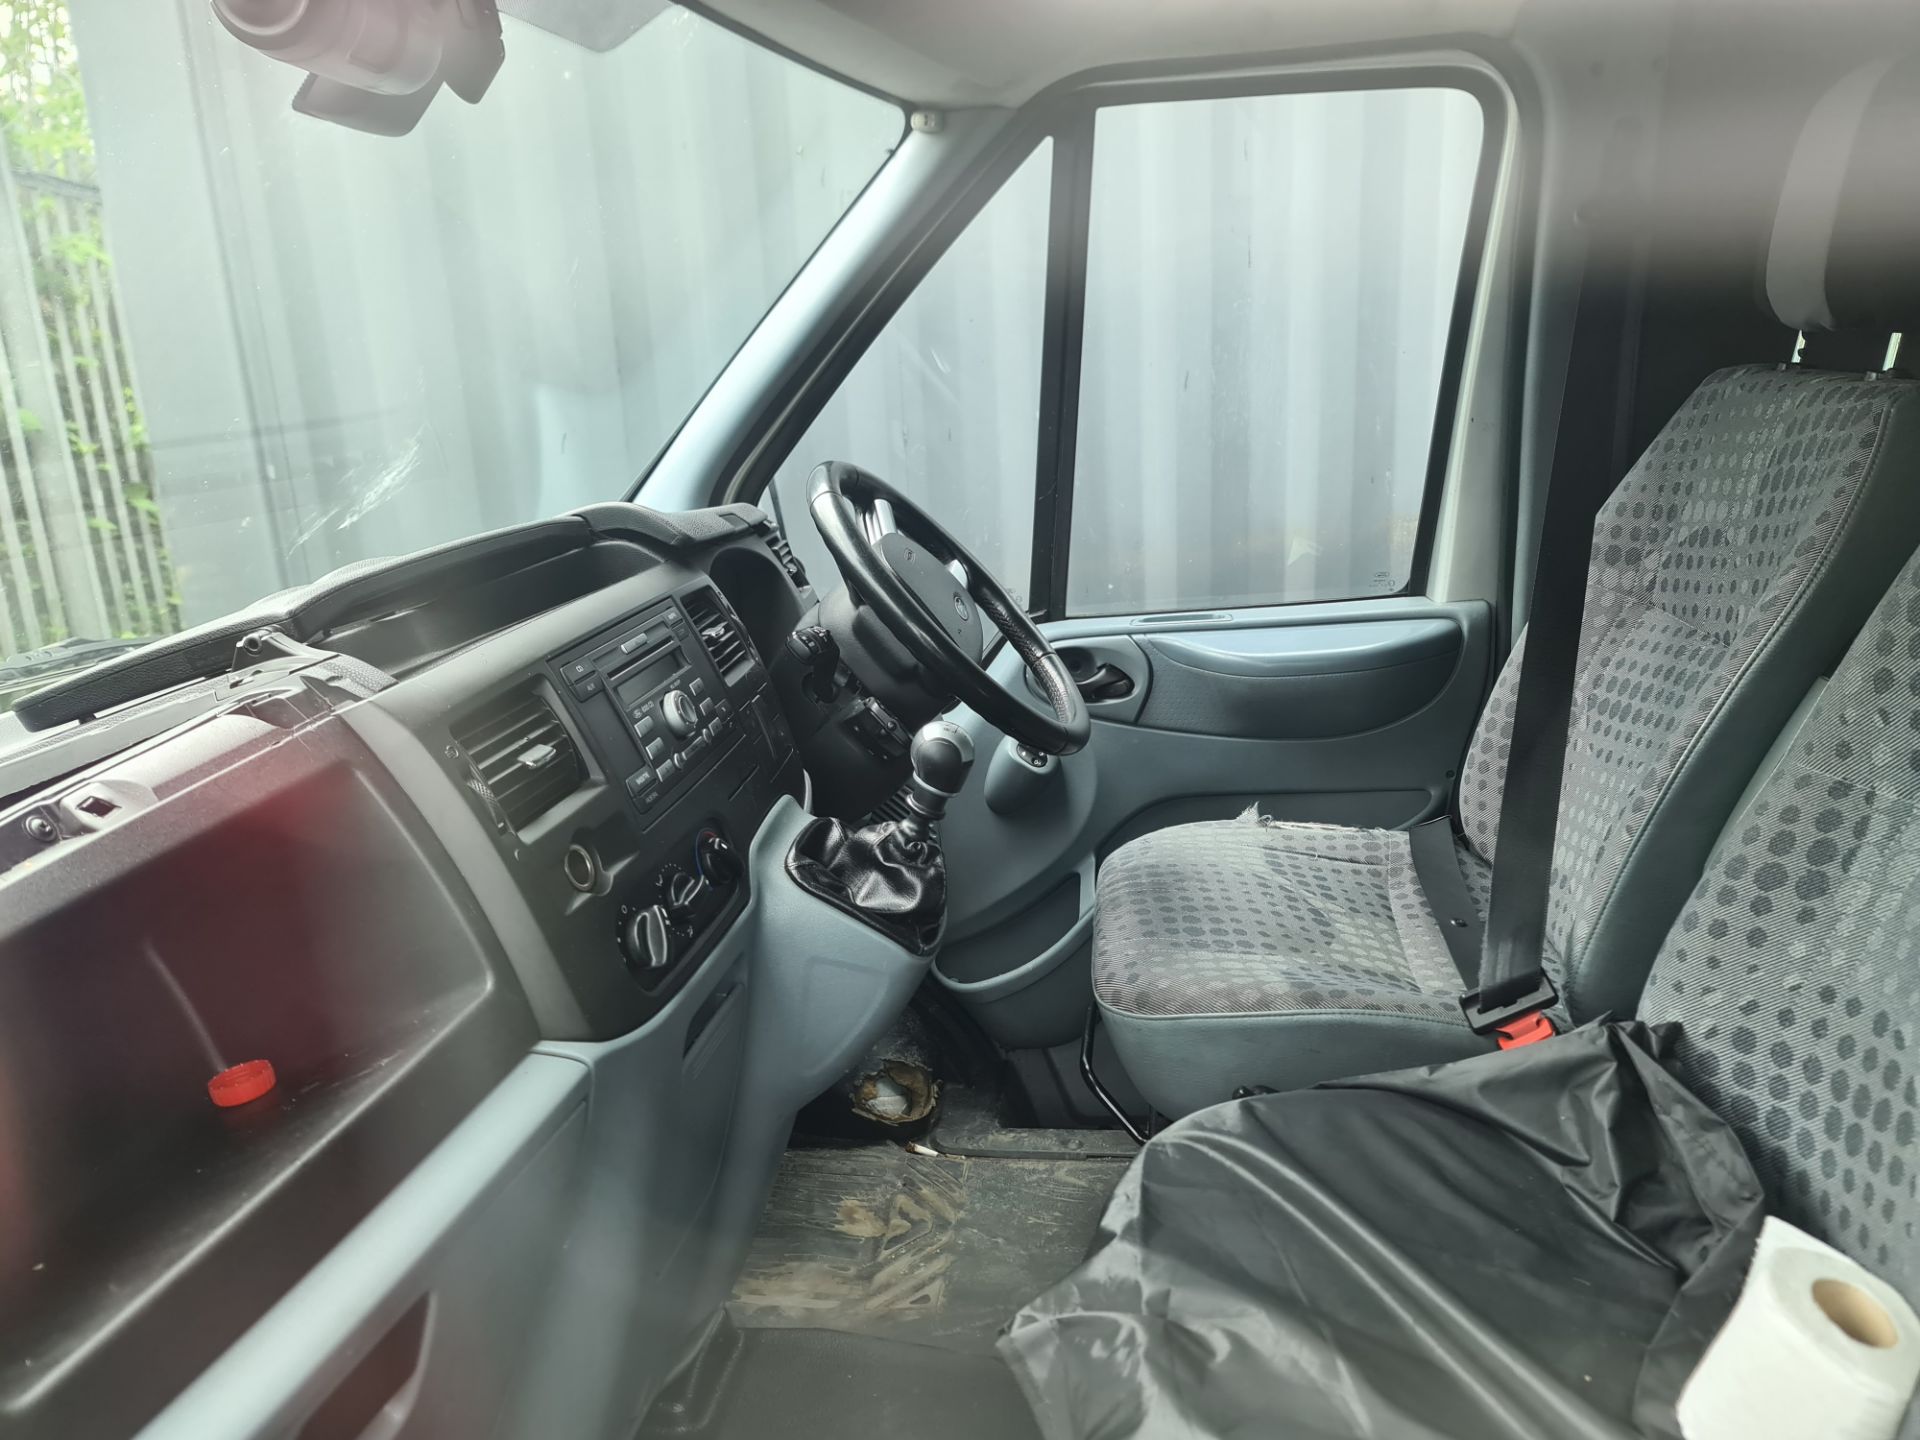 2012 Ford Transit 125 T280 Trend FWD panel van - Image 13 of 19